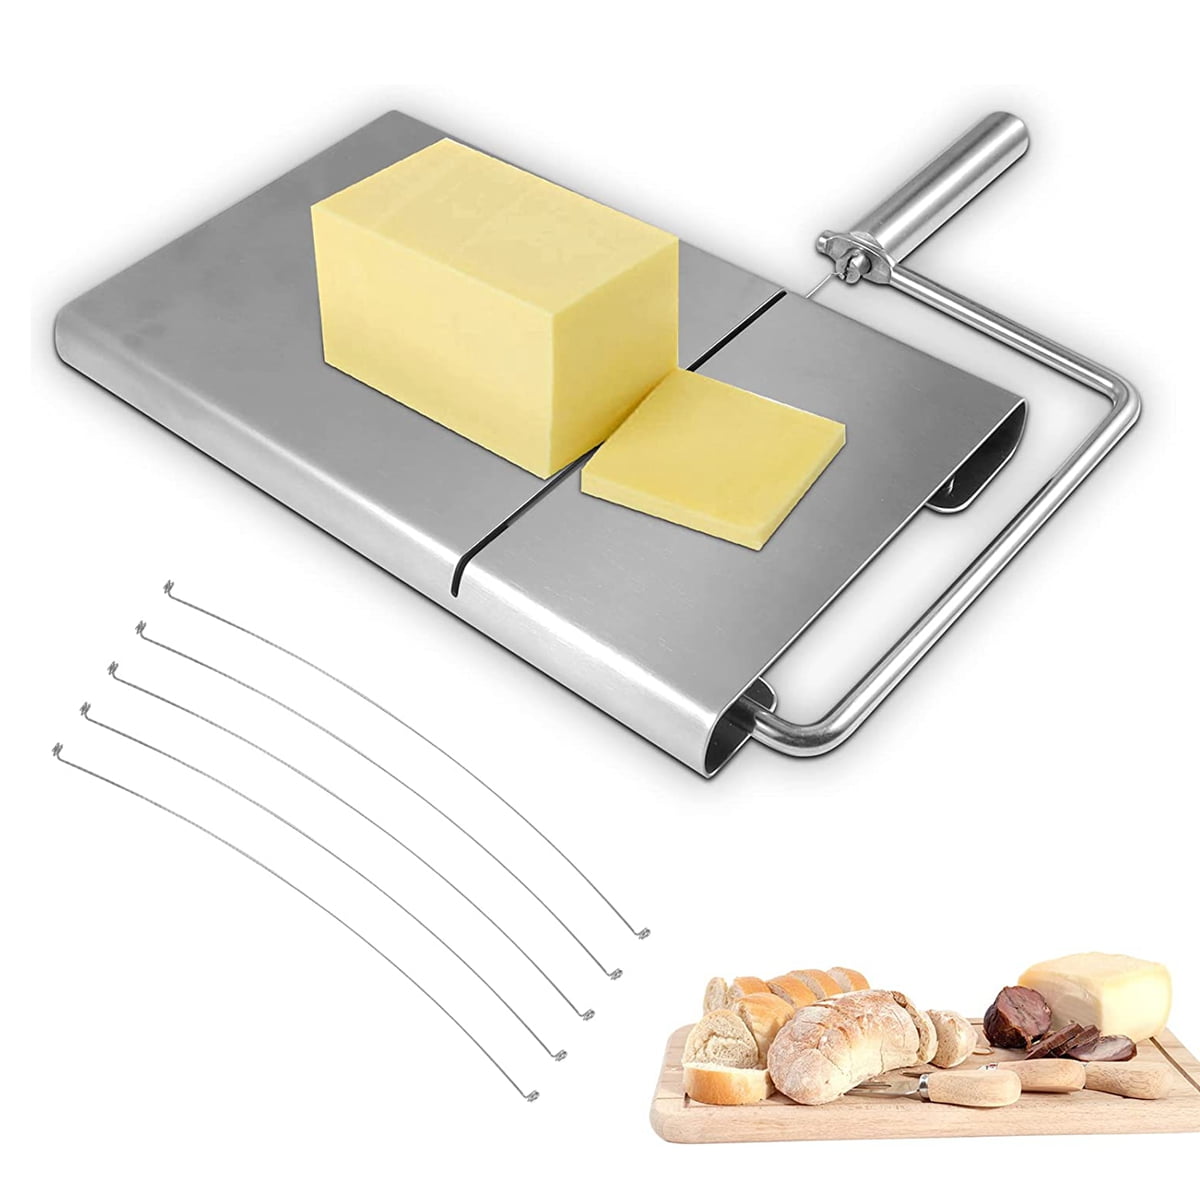 Equipped with 5Replaceable Cheese Slicer Wires Stainless Steel Modern Cheese Slicer Stainless Steel Cheese Cutter,Wire Cheese Slicer for Cheese Butter 